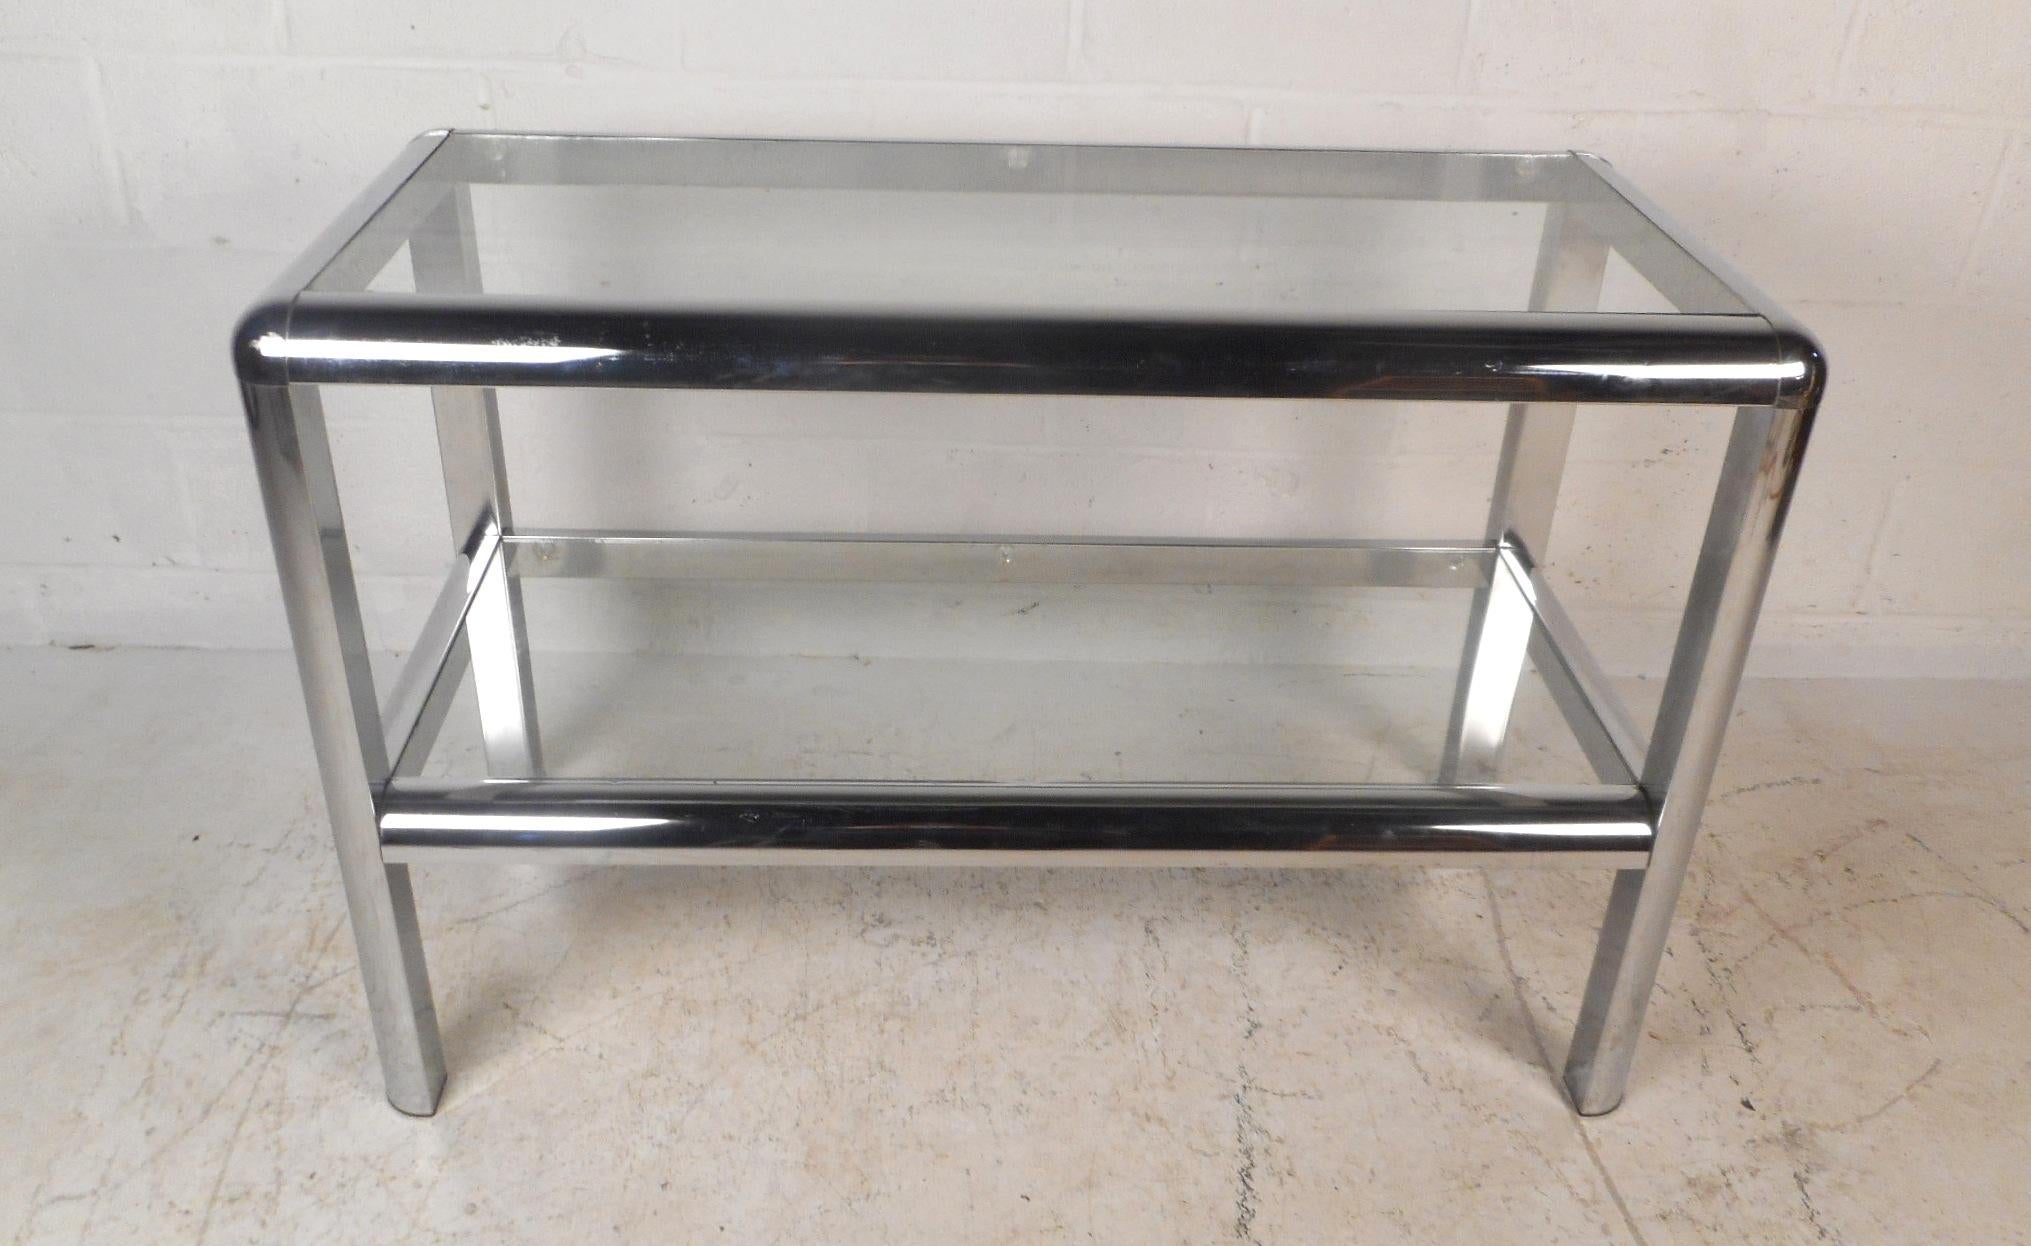 This stunning vintage modern console table features two tiers of glass shelving within a tubular metal frame. A unique and versatile design that can function as an end table, coffee table, or a console table. This sleek midcentury piece makes the